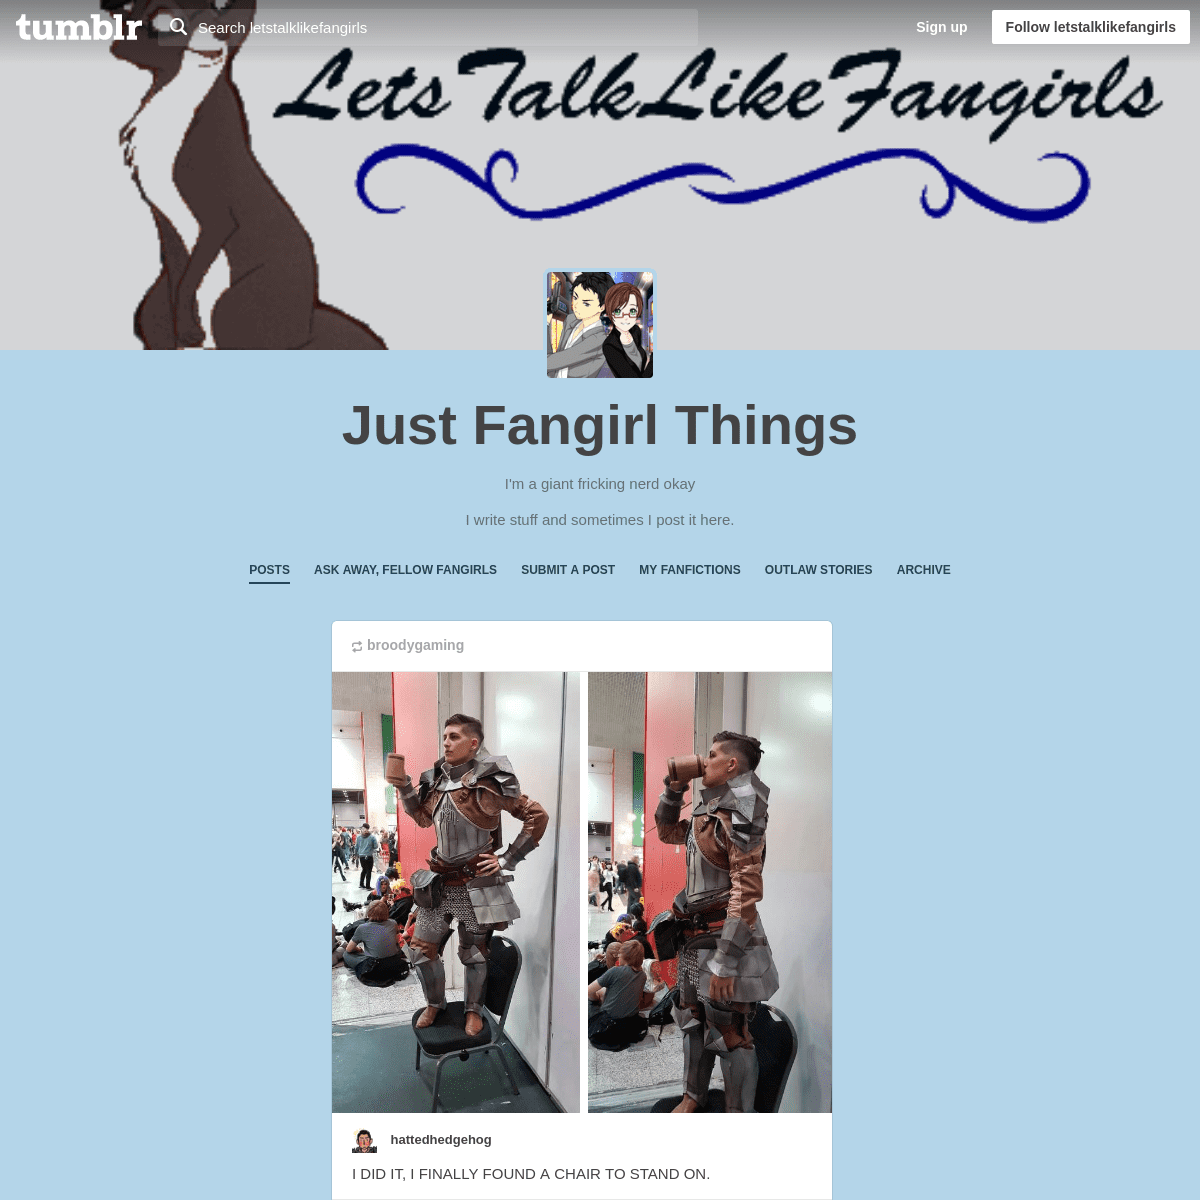 Just Fangirl Things